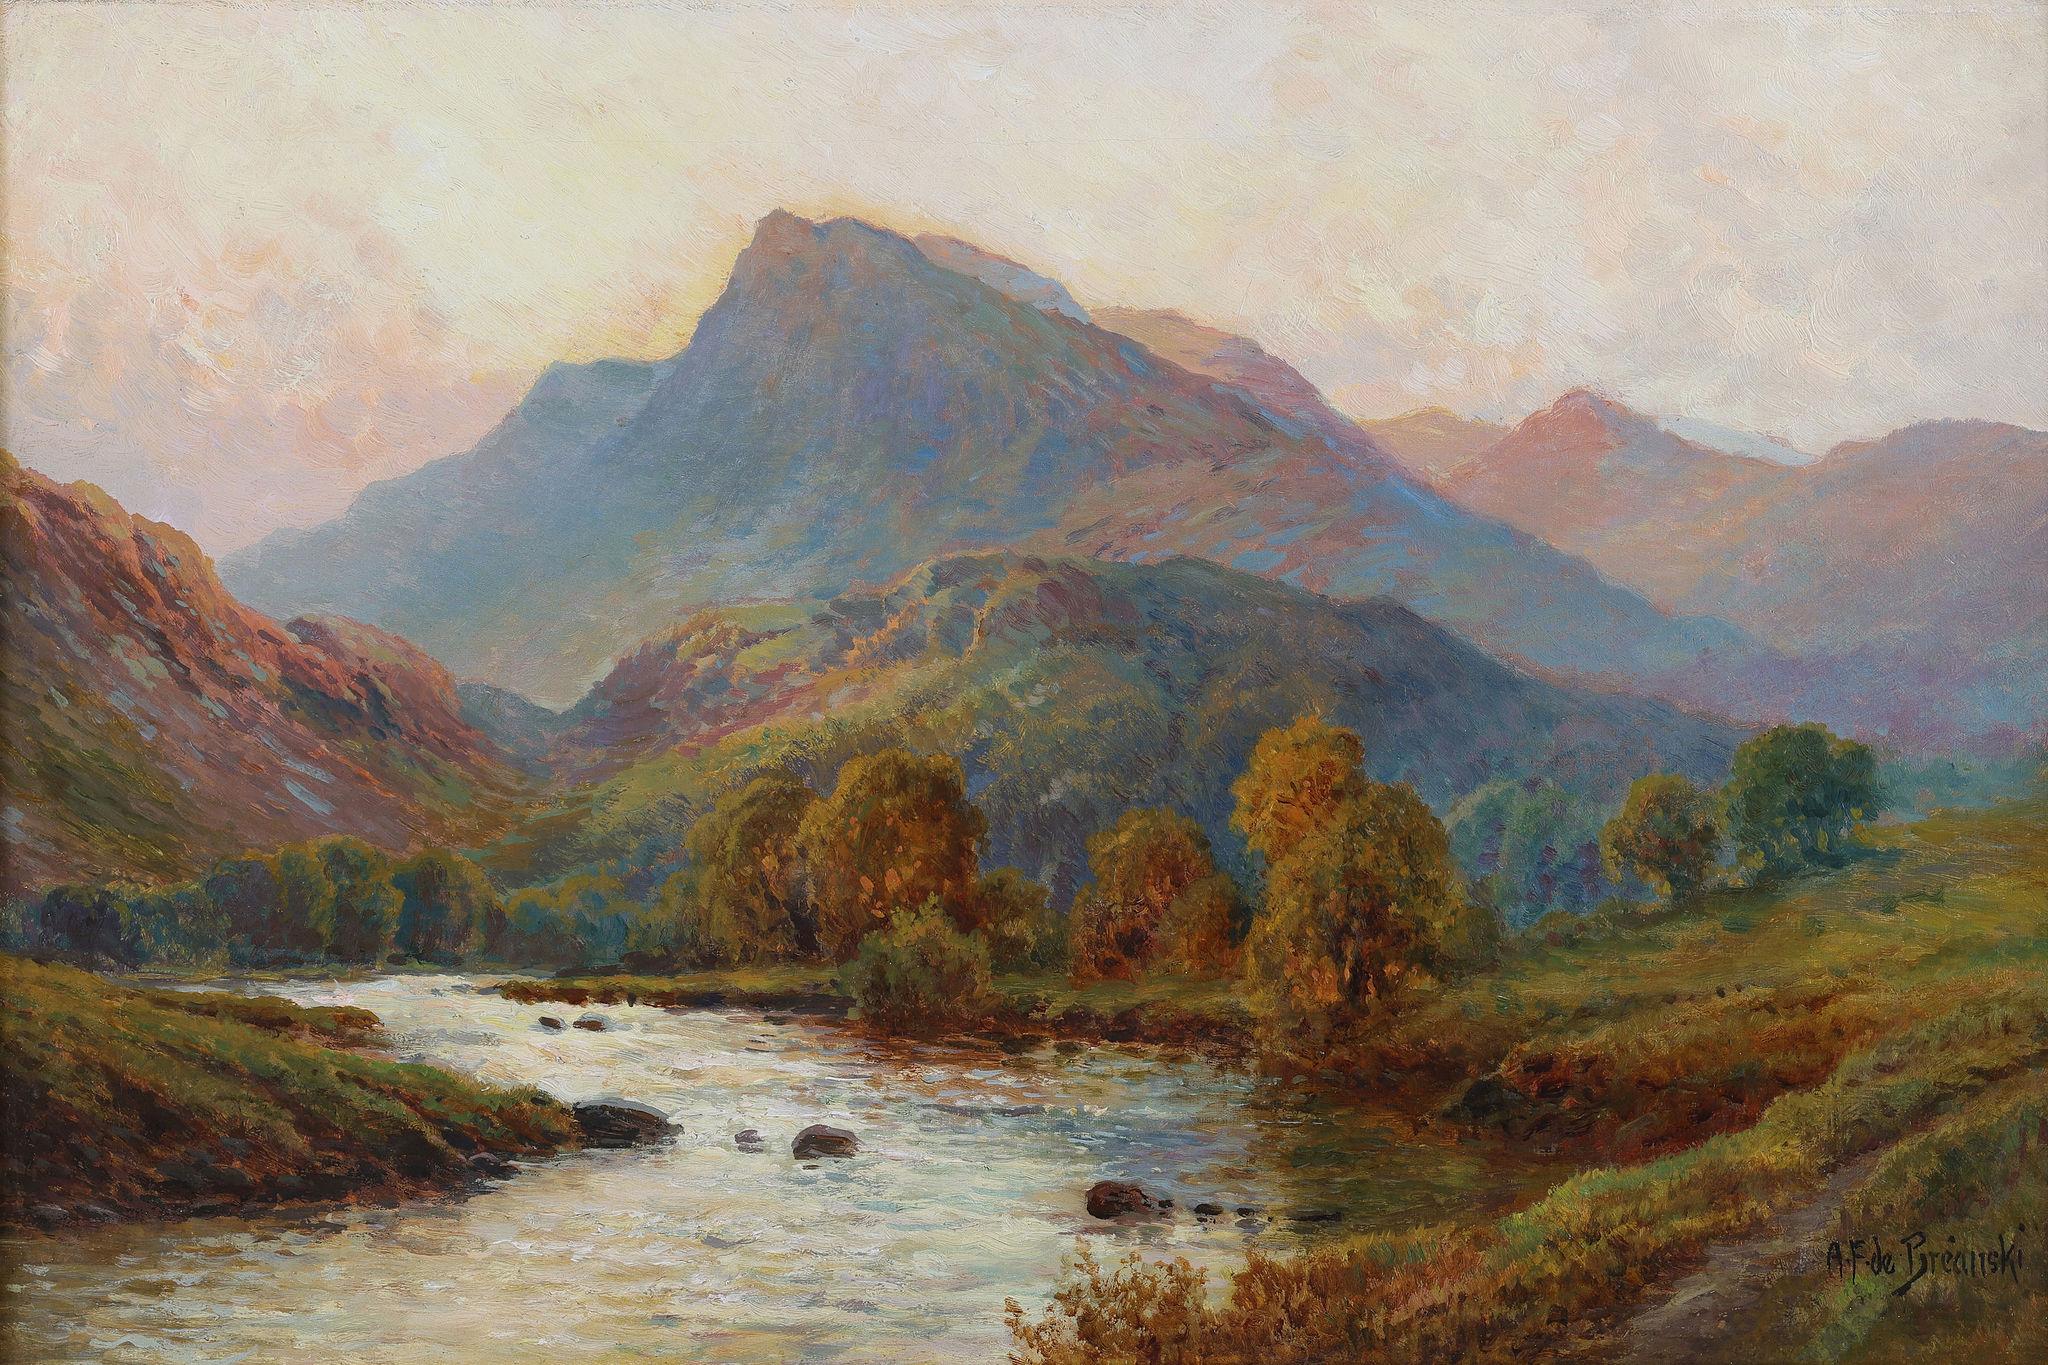 In the Highlands, The Running River - Painting by Alfred de Breanski Jnr.